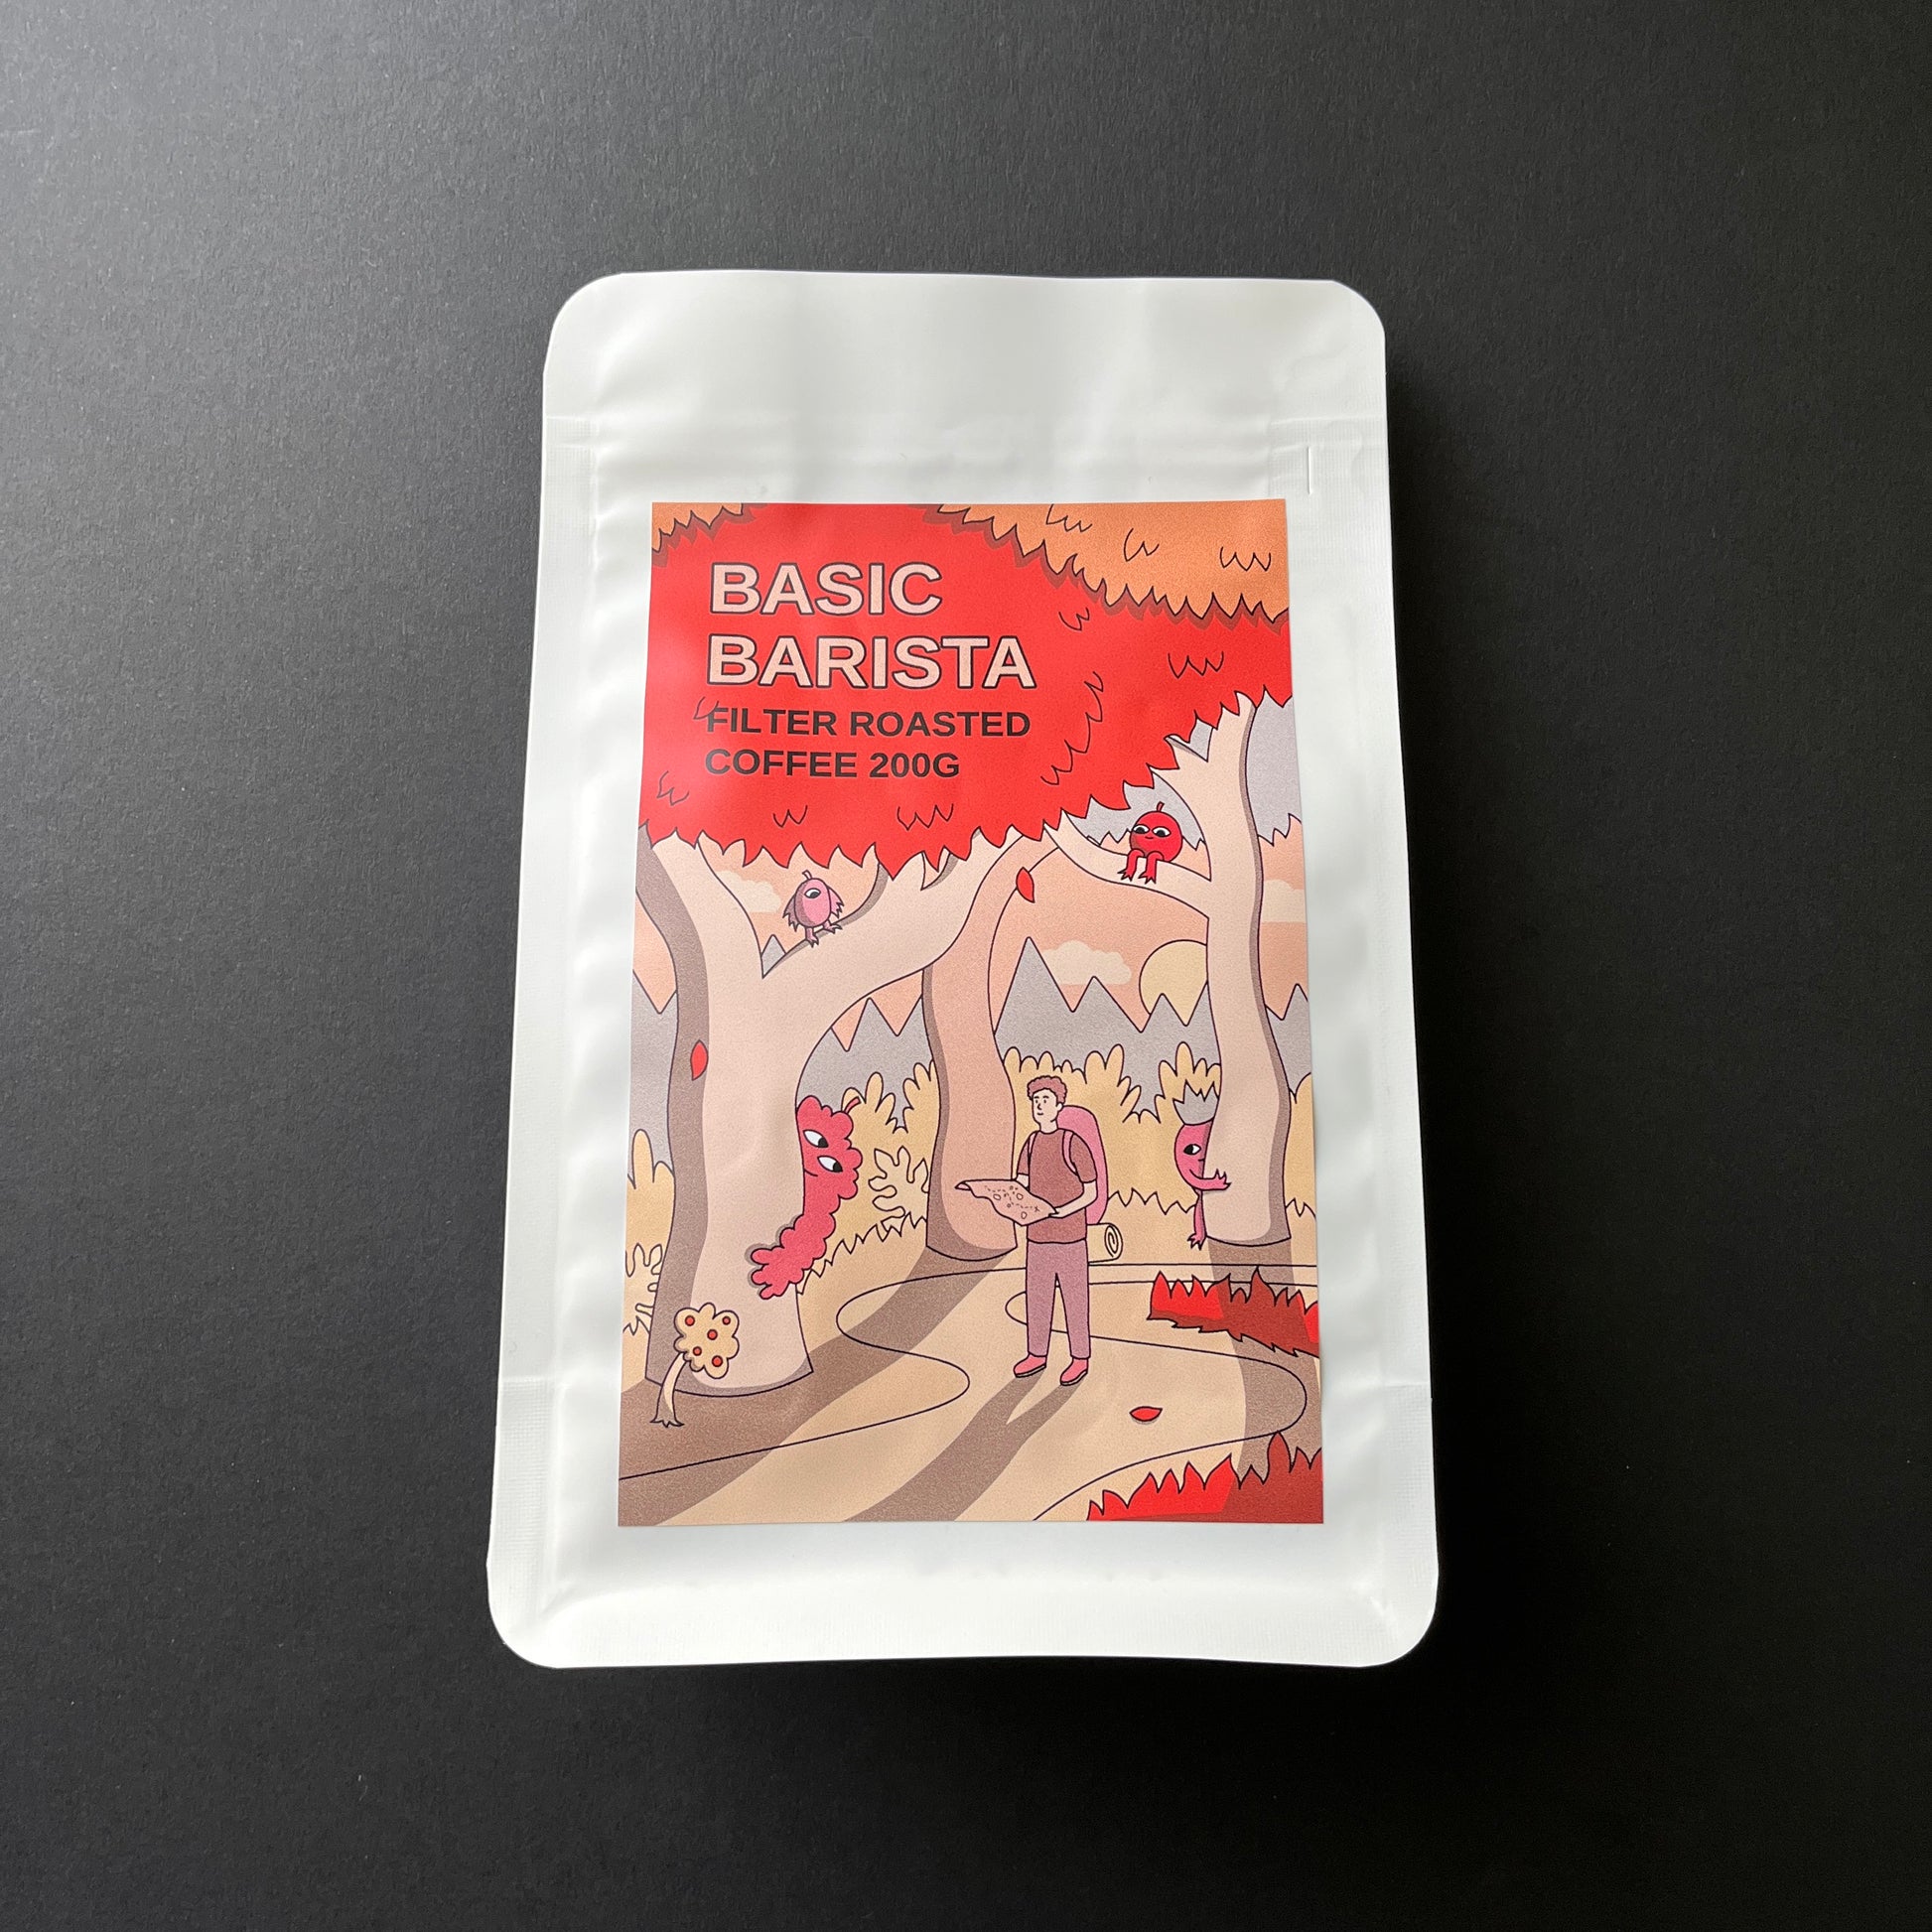 Pacamara Thermoshock Double Ferment Micro lot Filter Roasted coffee beans coffee bag red label design Filter roasted specialty coffee Melbourne Australia 